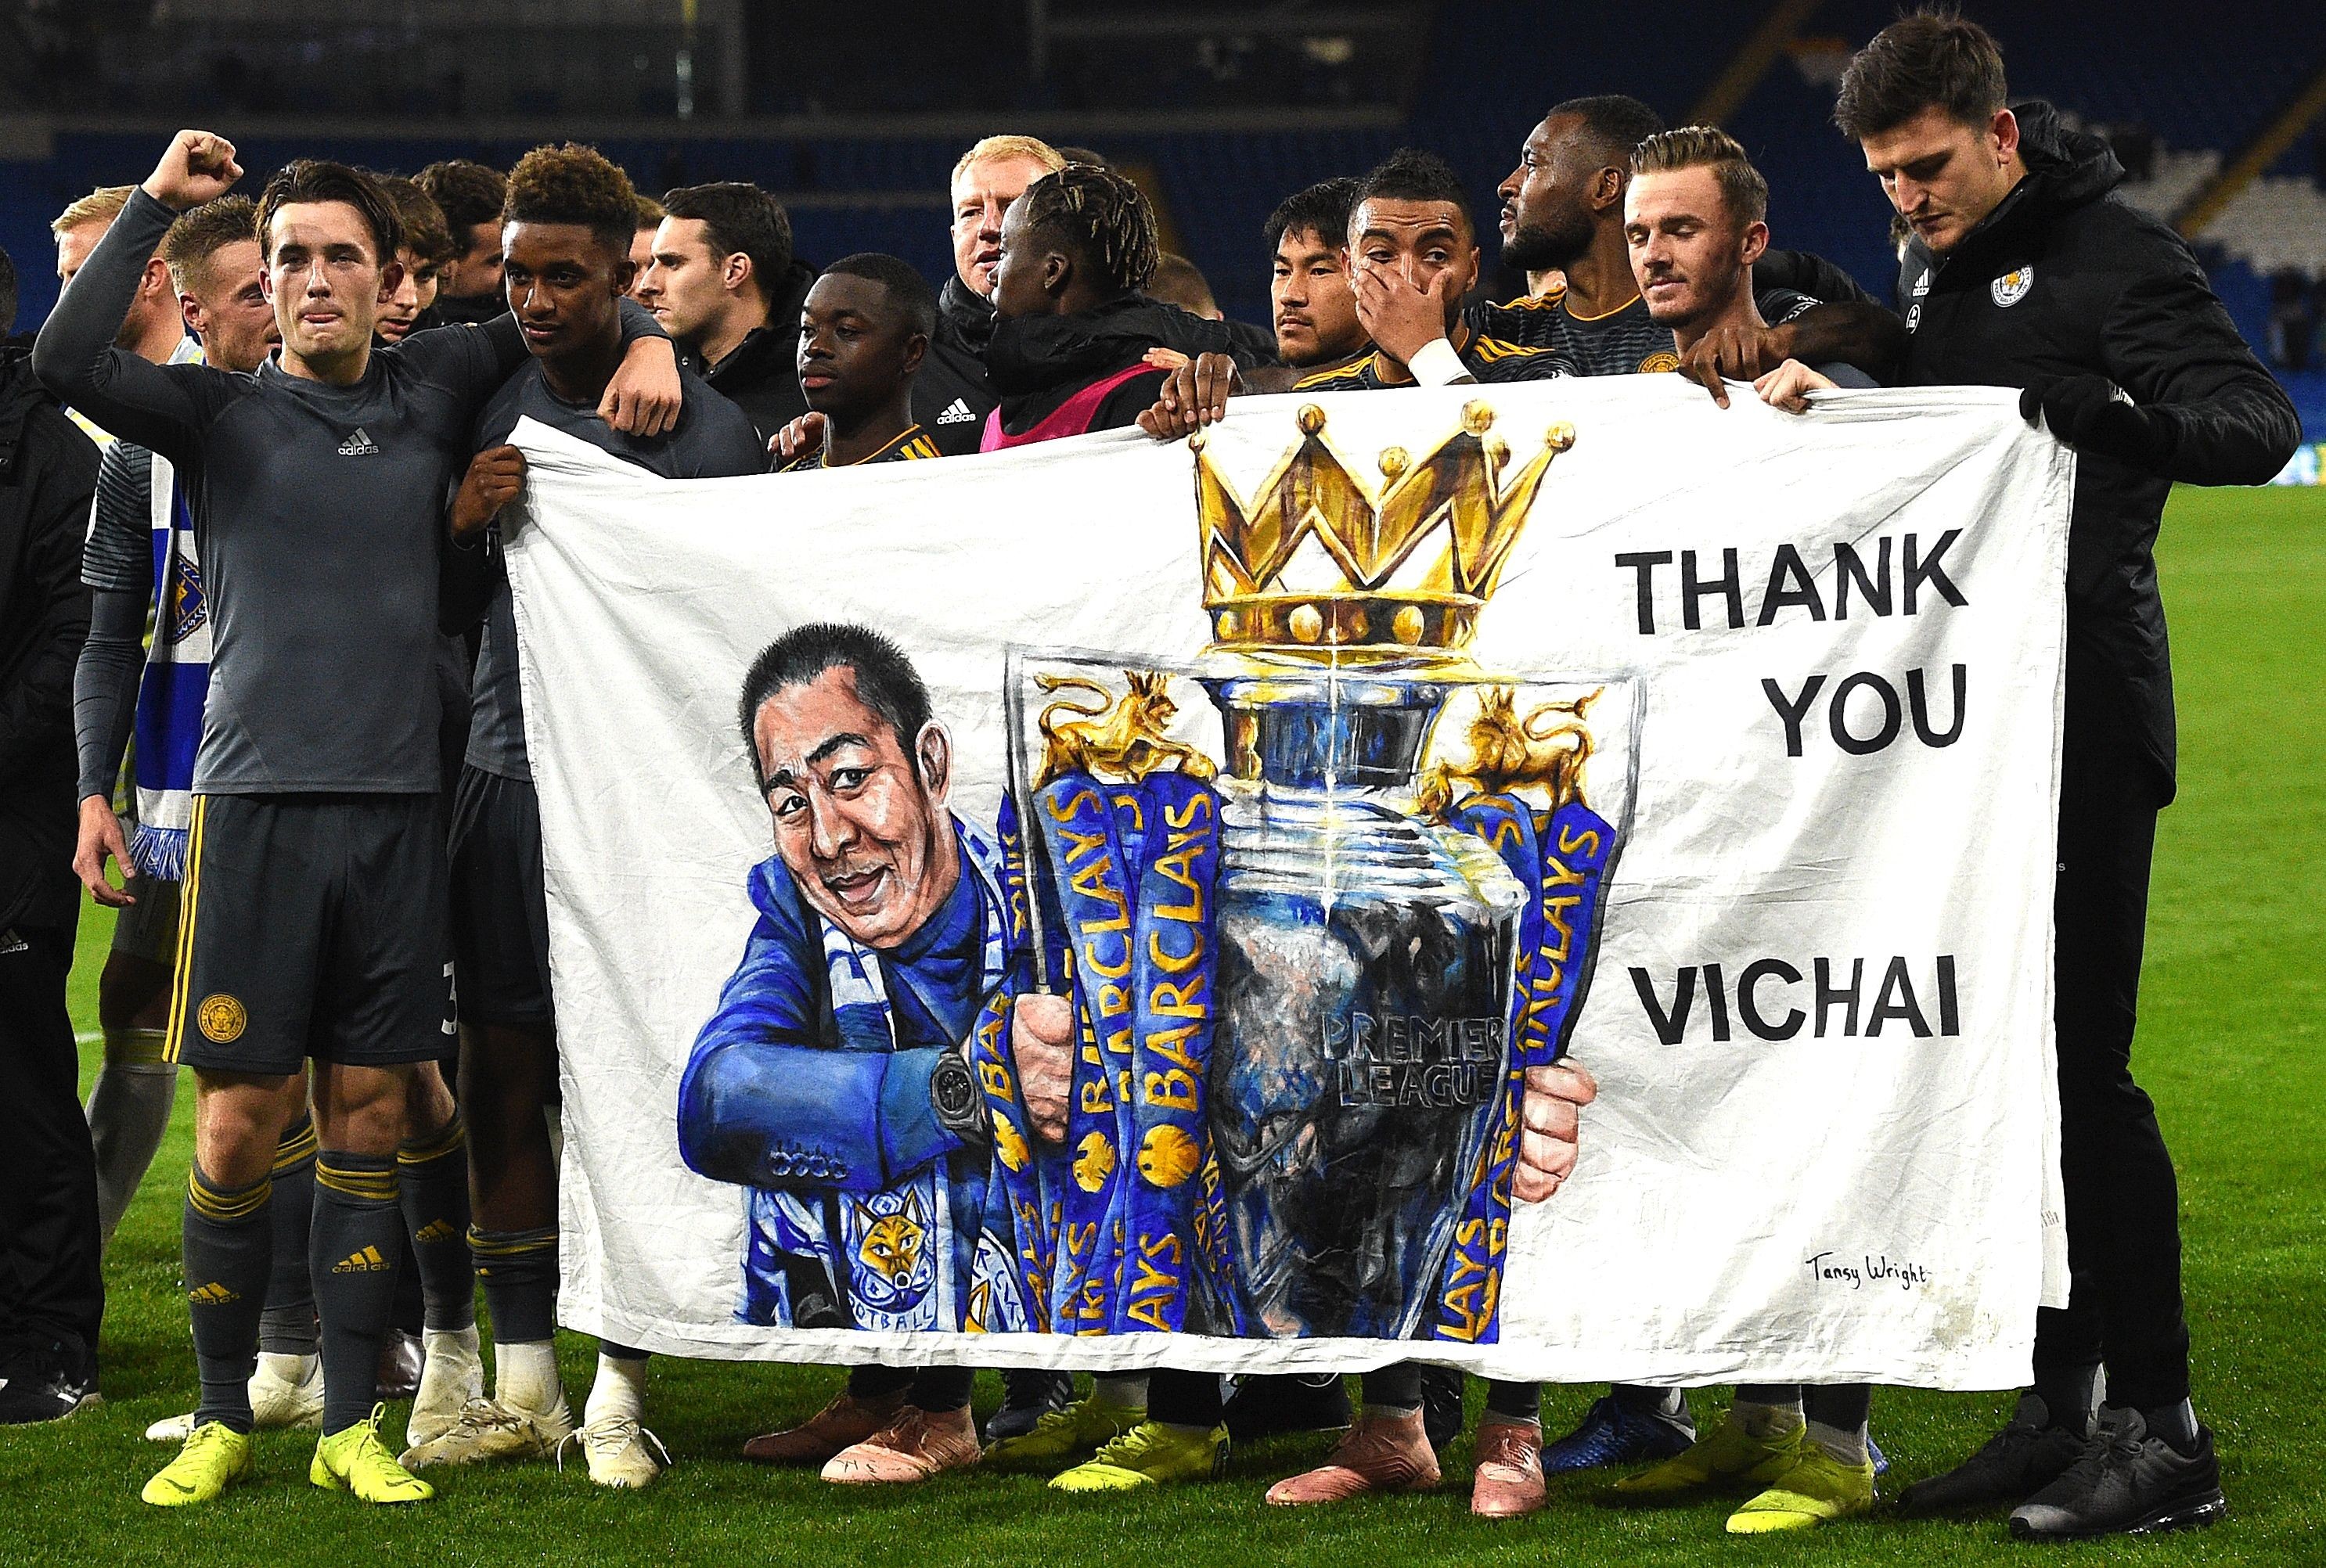 Leicester’s players hold a banner in tribute to Vichai Srivaddhanaprabha. Photo: AFP